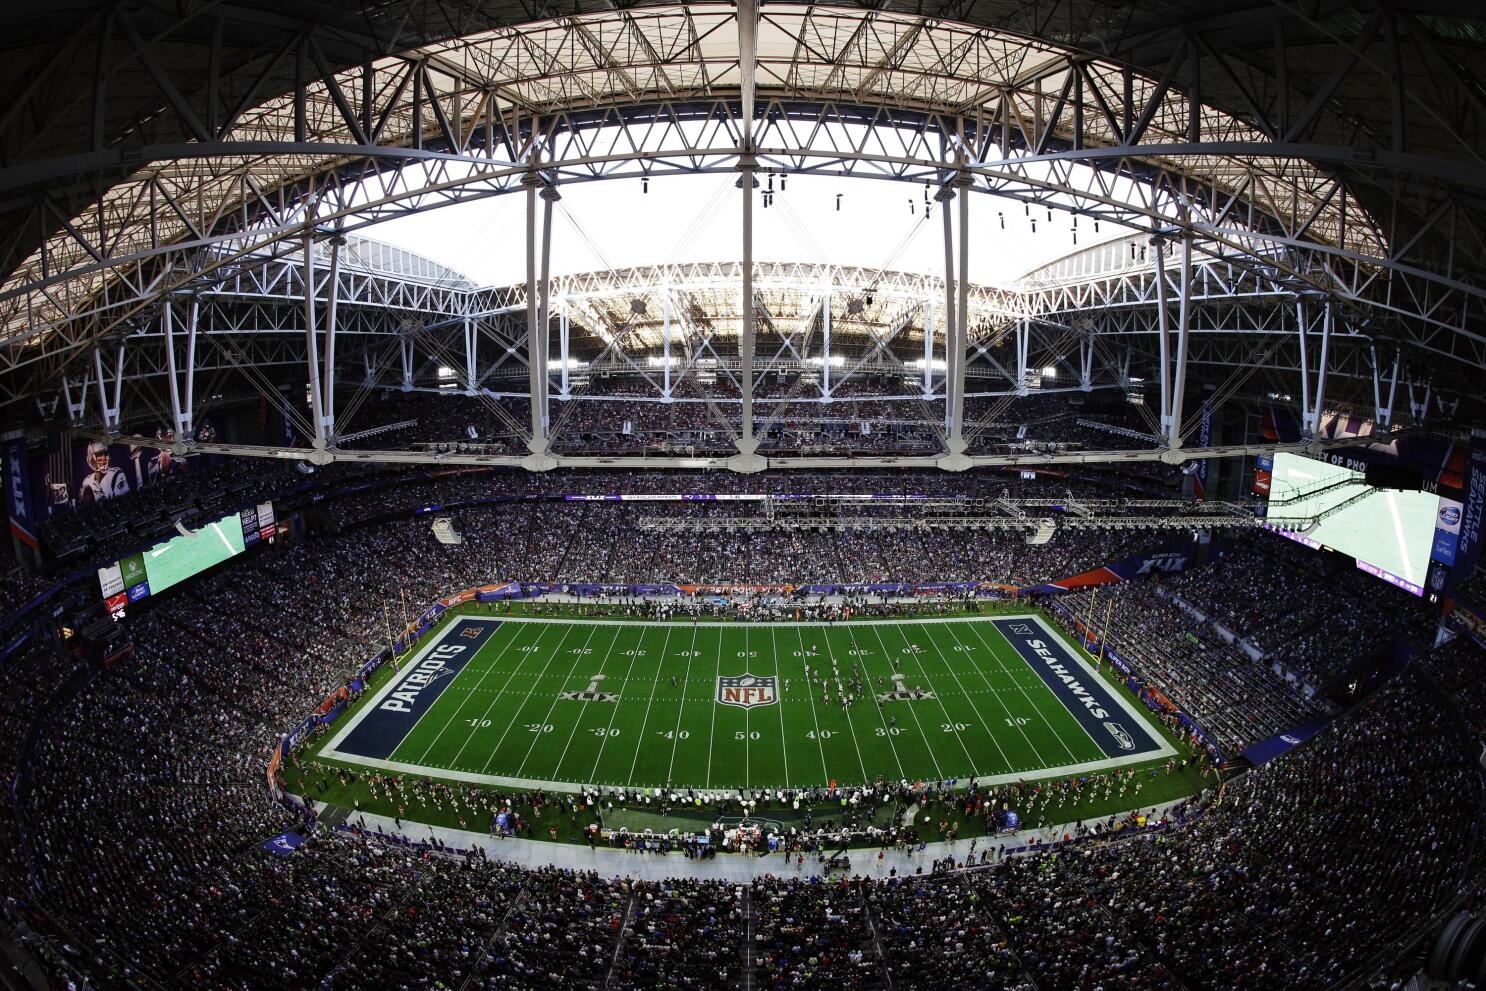 Super Bowl's grass turf required nearly 2-year process